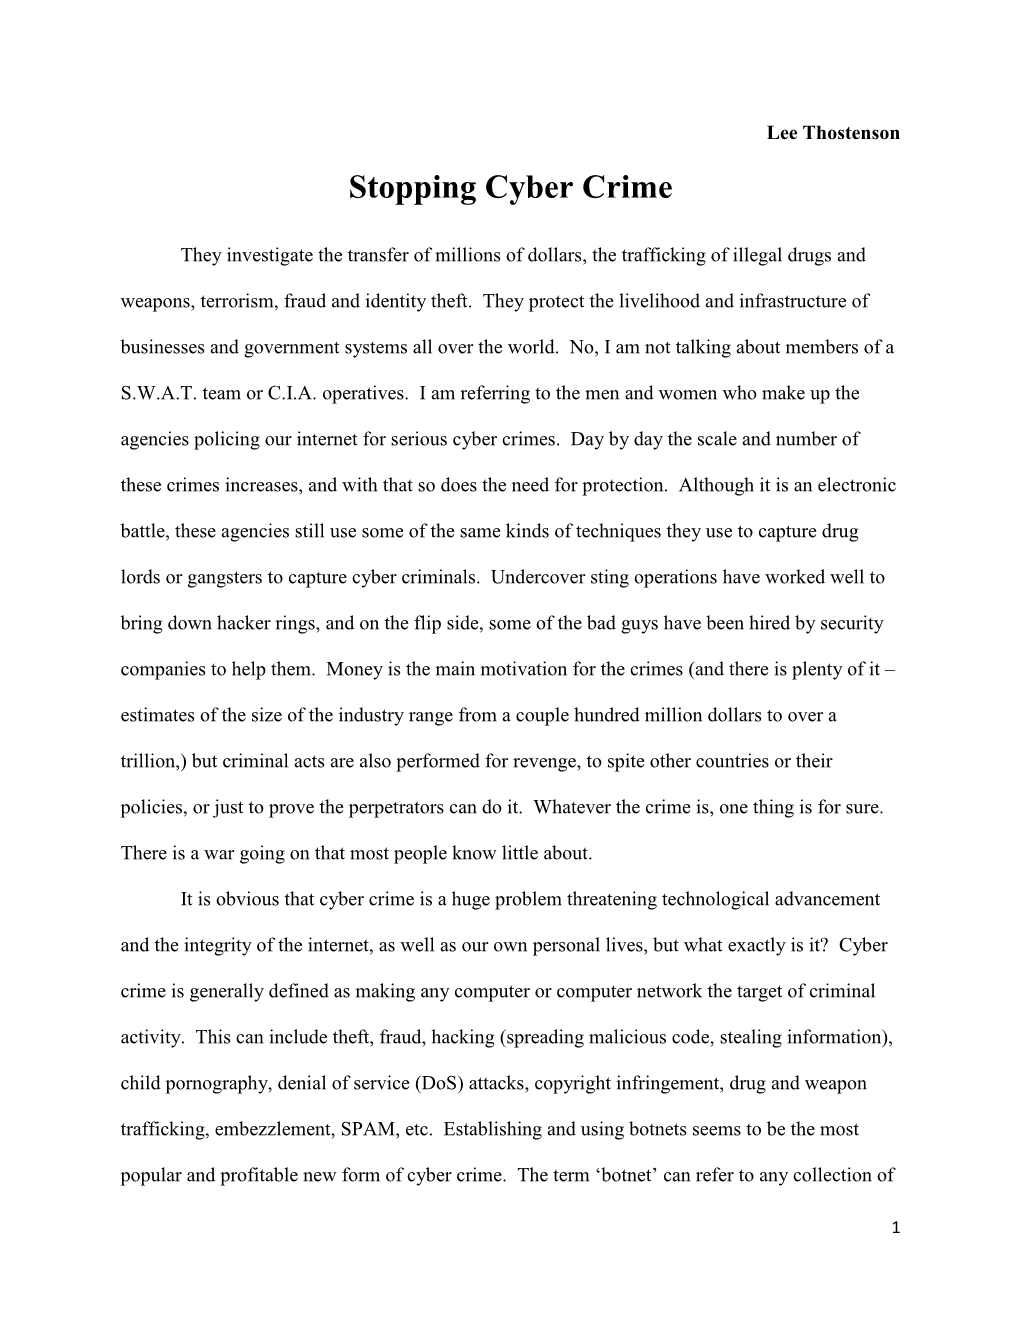 Stopping Cyber Crime